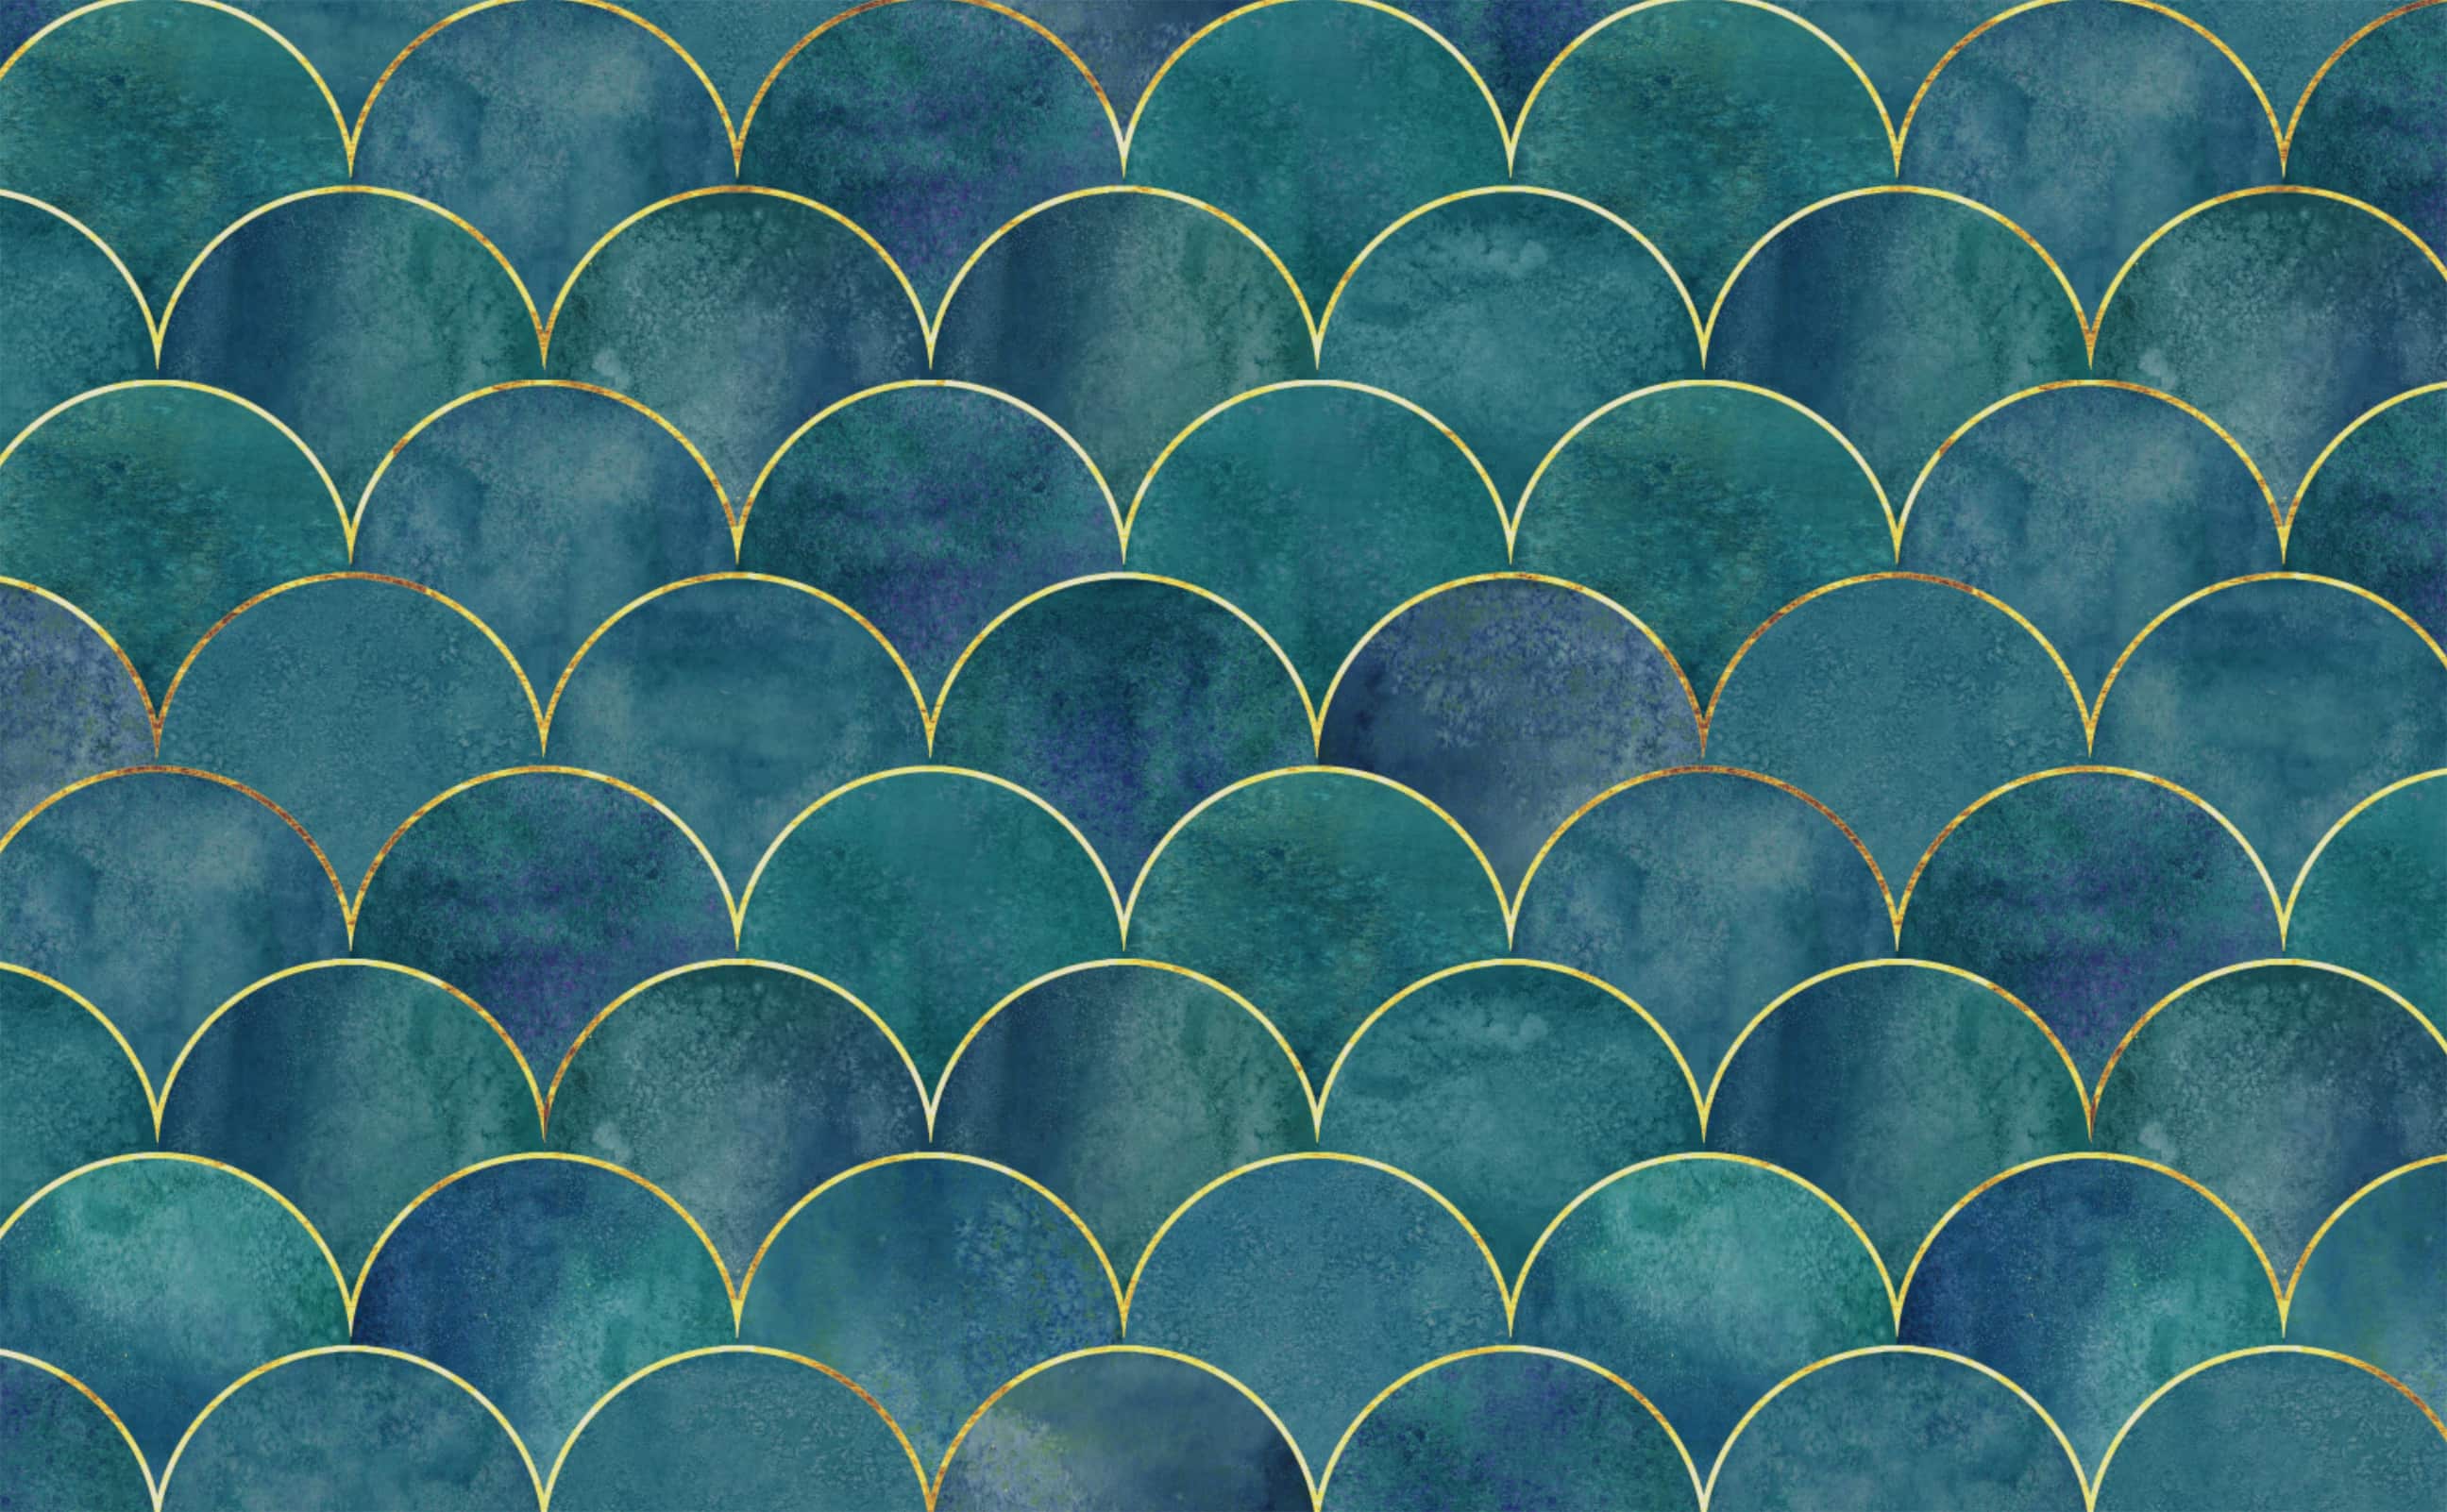 Teal Gold Marble Texture Background In Abstract Style For Mobile Wallpapers  Wallpaper Image For Free Download  Pngtree  Gold wallpaper iphone Teal  and gold wallpaper Textured background